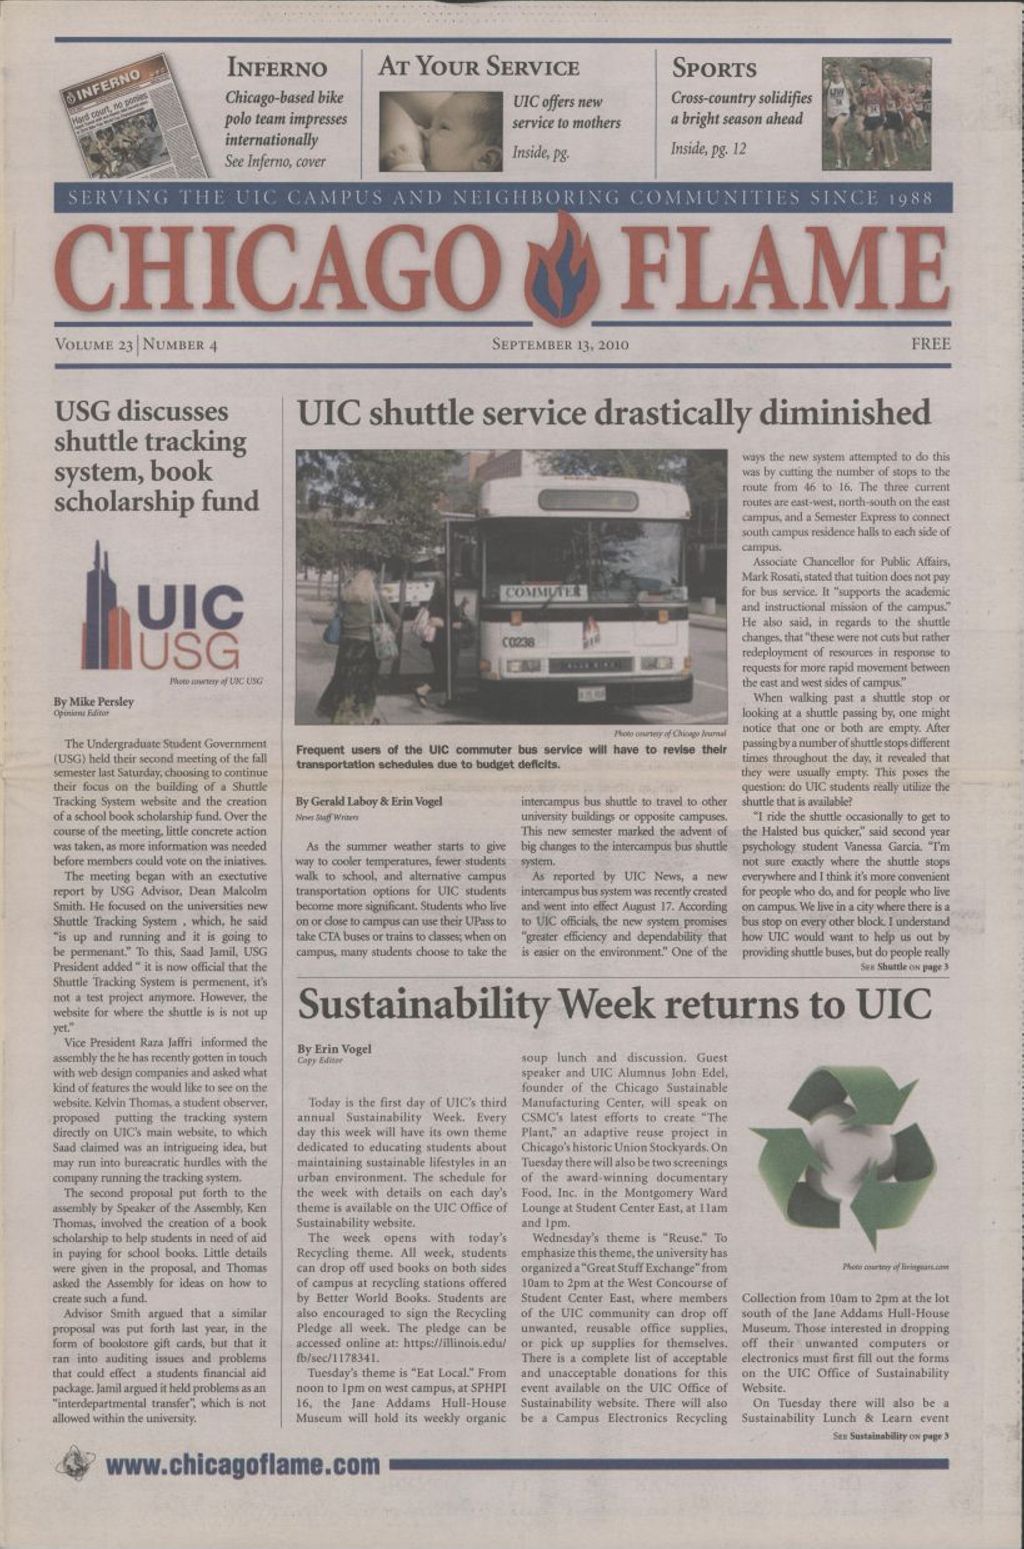 Miniature of Chicago Flame (September 13, 2010)